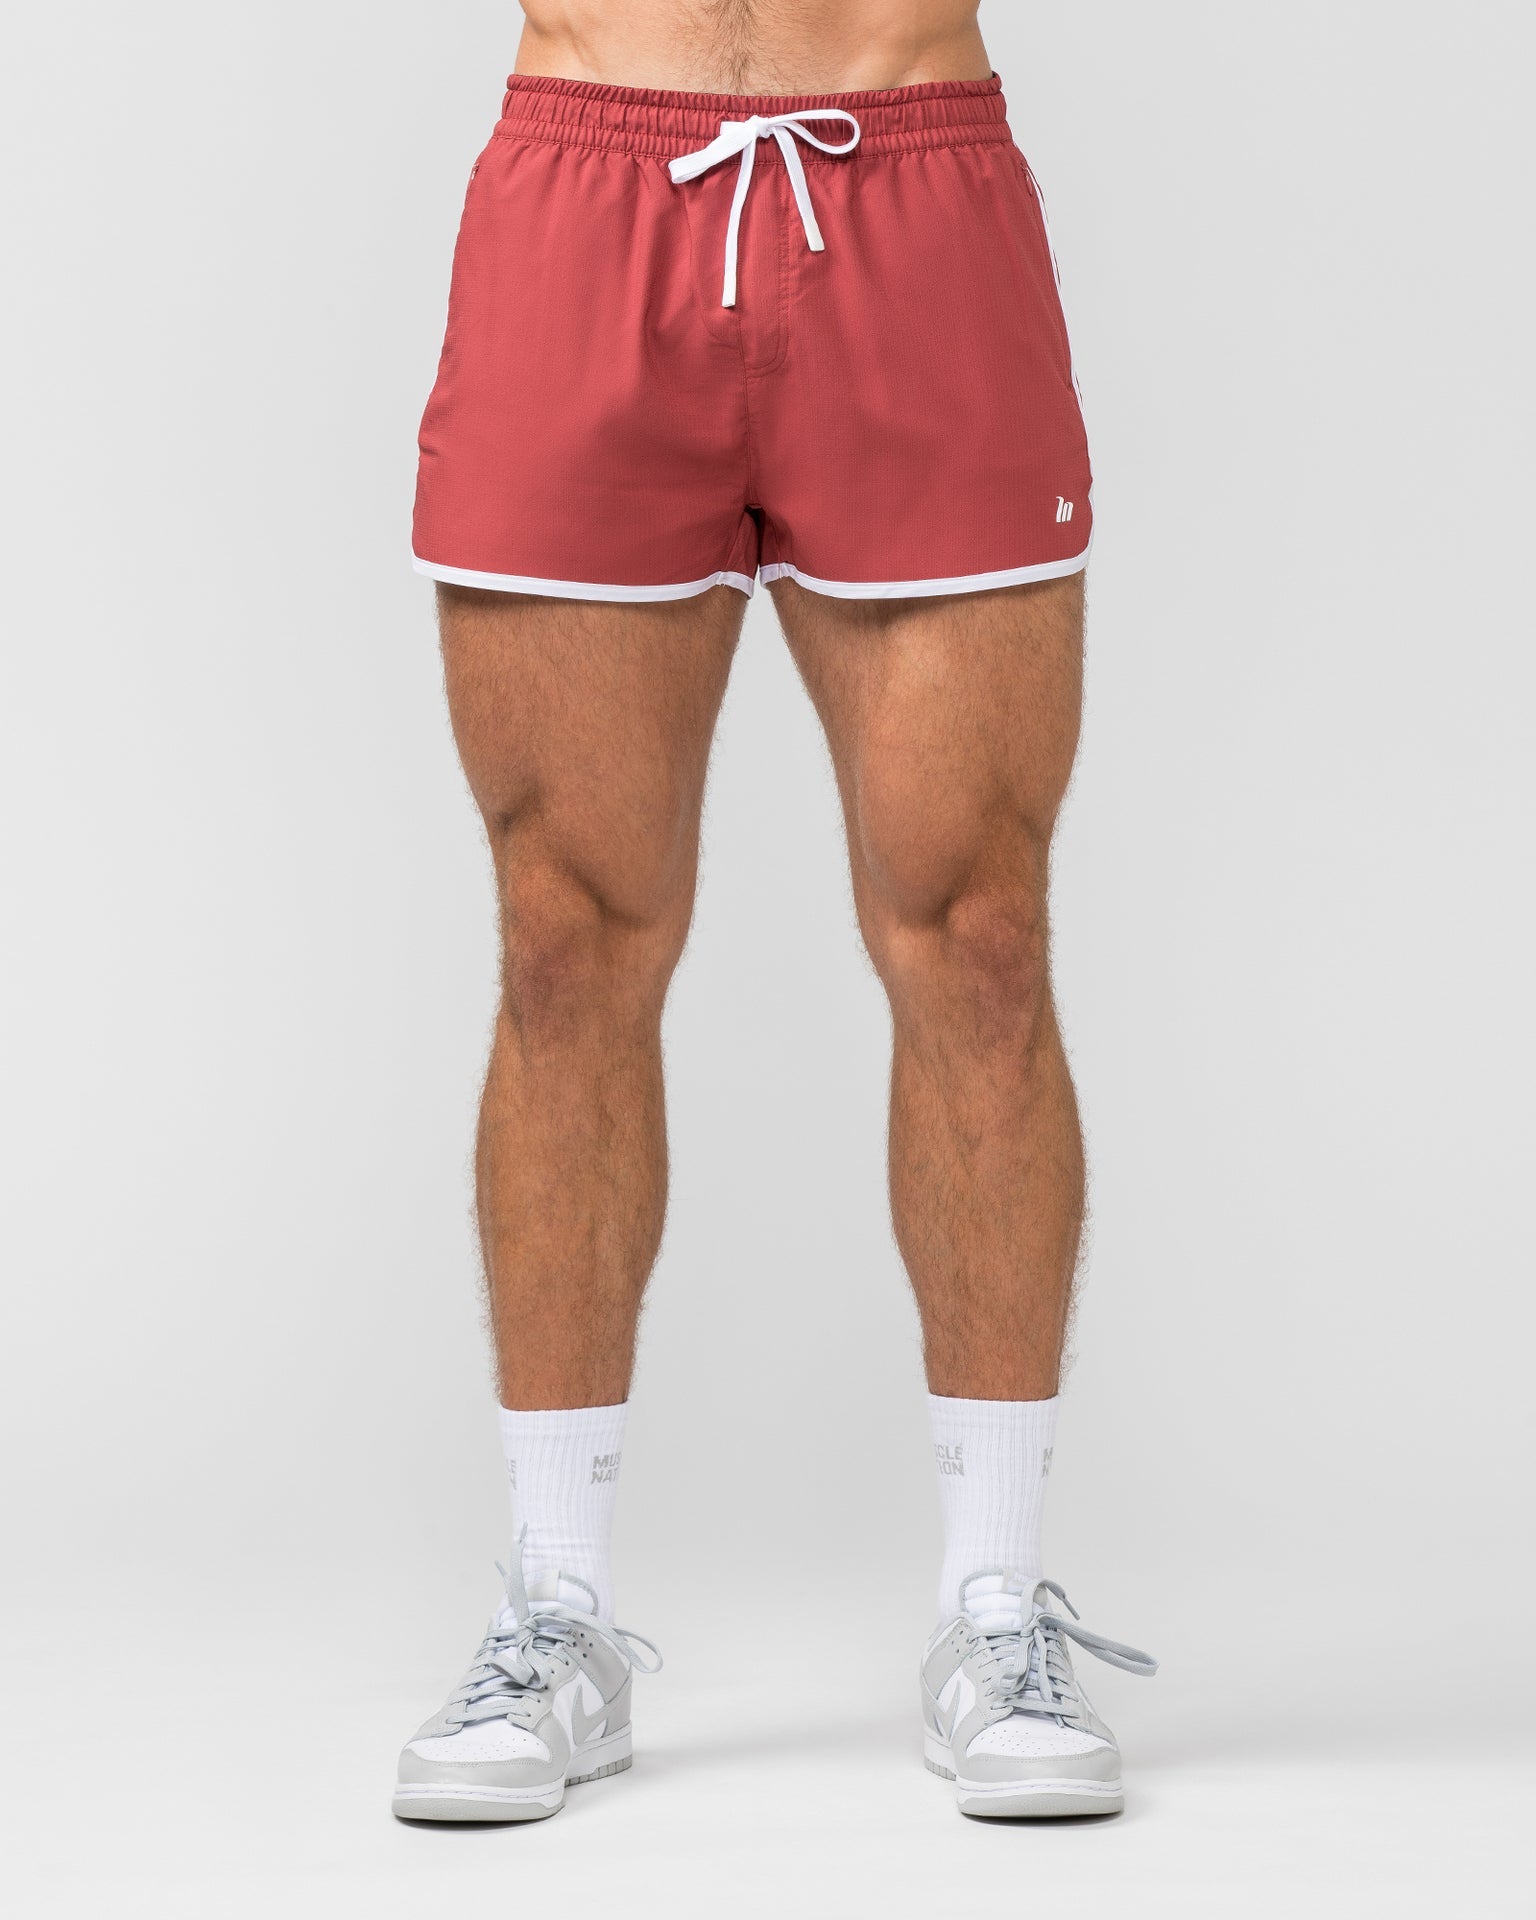 Muscle Nation Gym Shorts Retro Shorts - Dusty Red